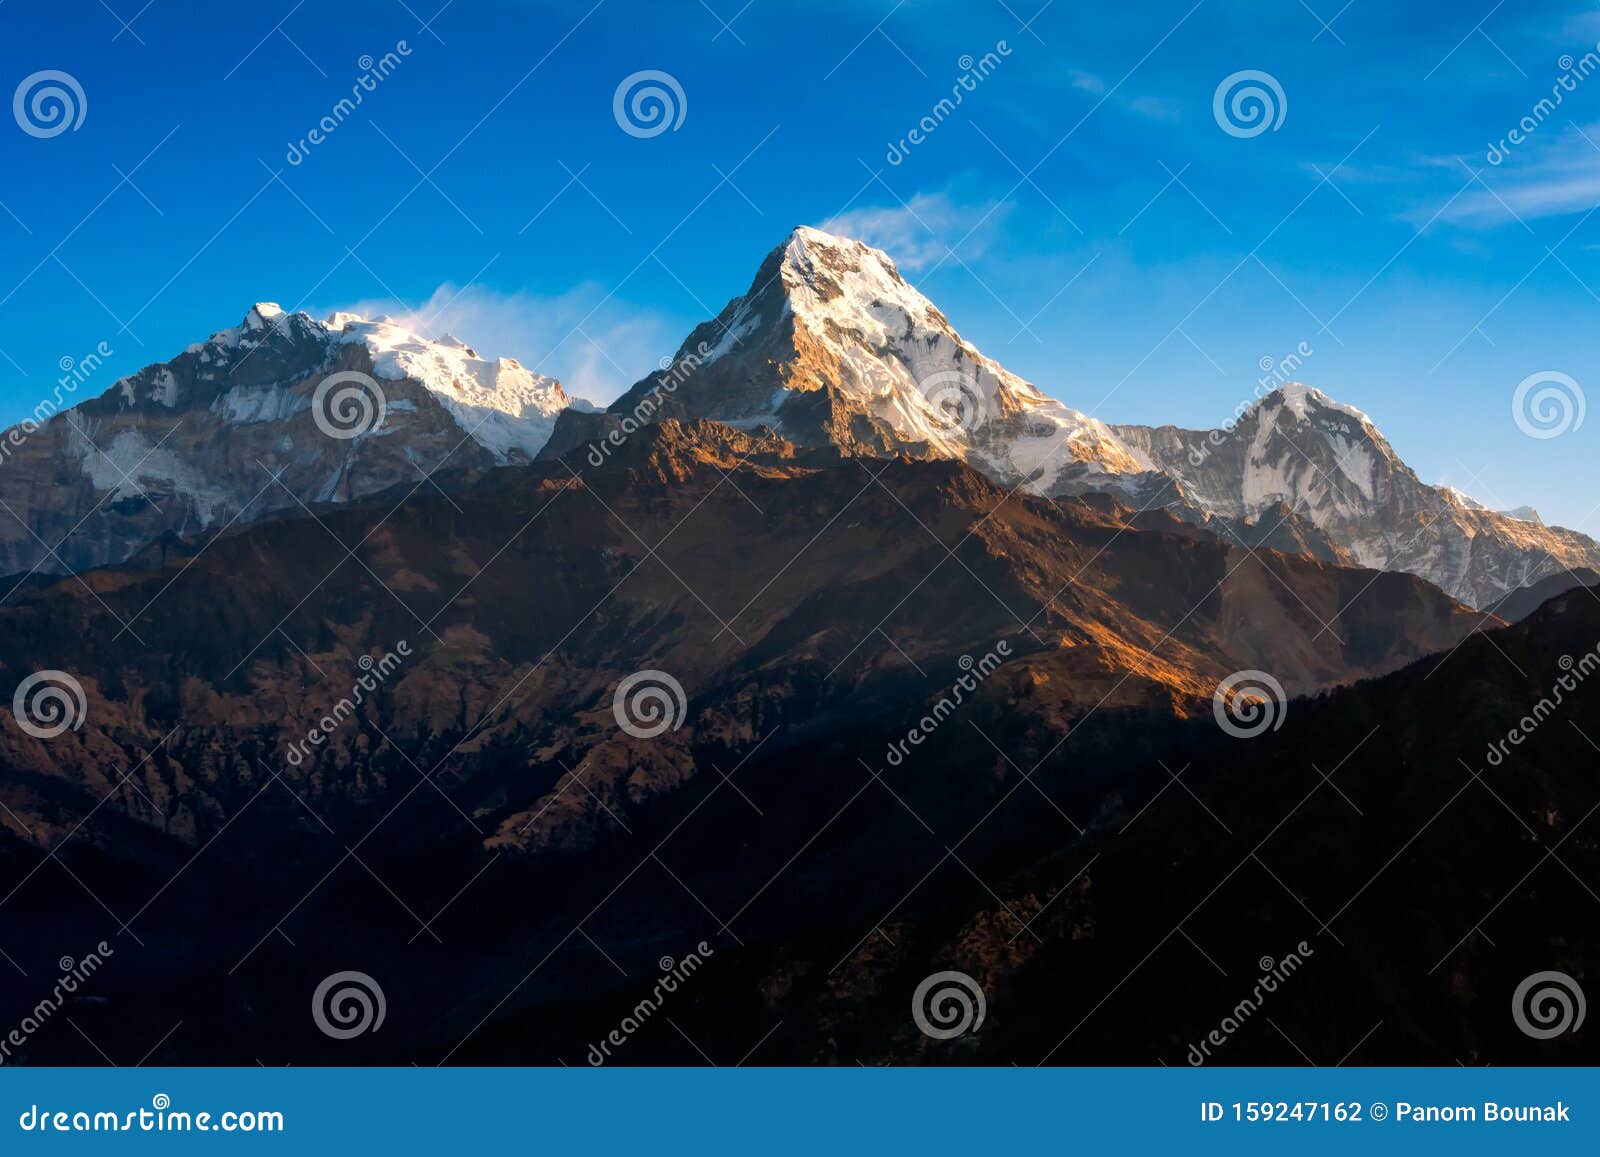 nature view of himalayan mountain range at poon hill view point,nepal.